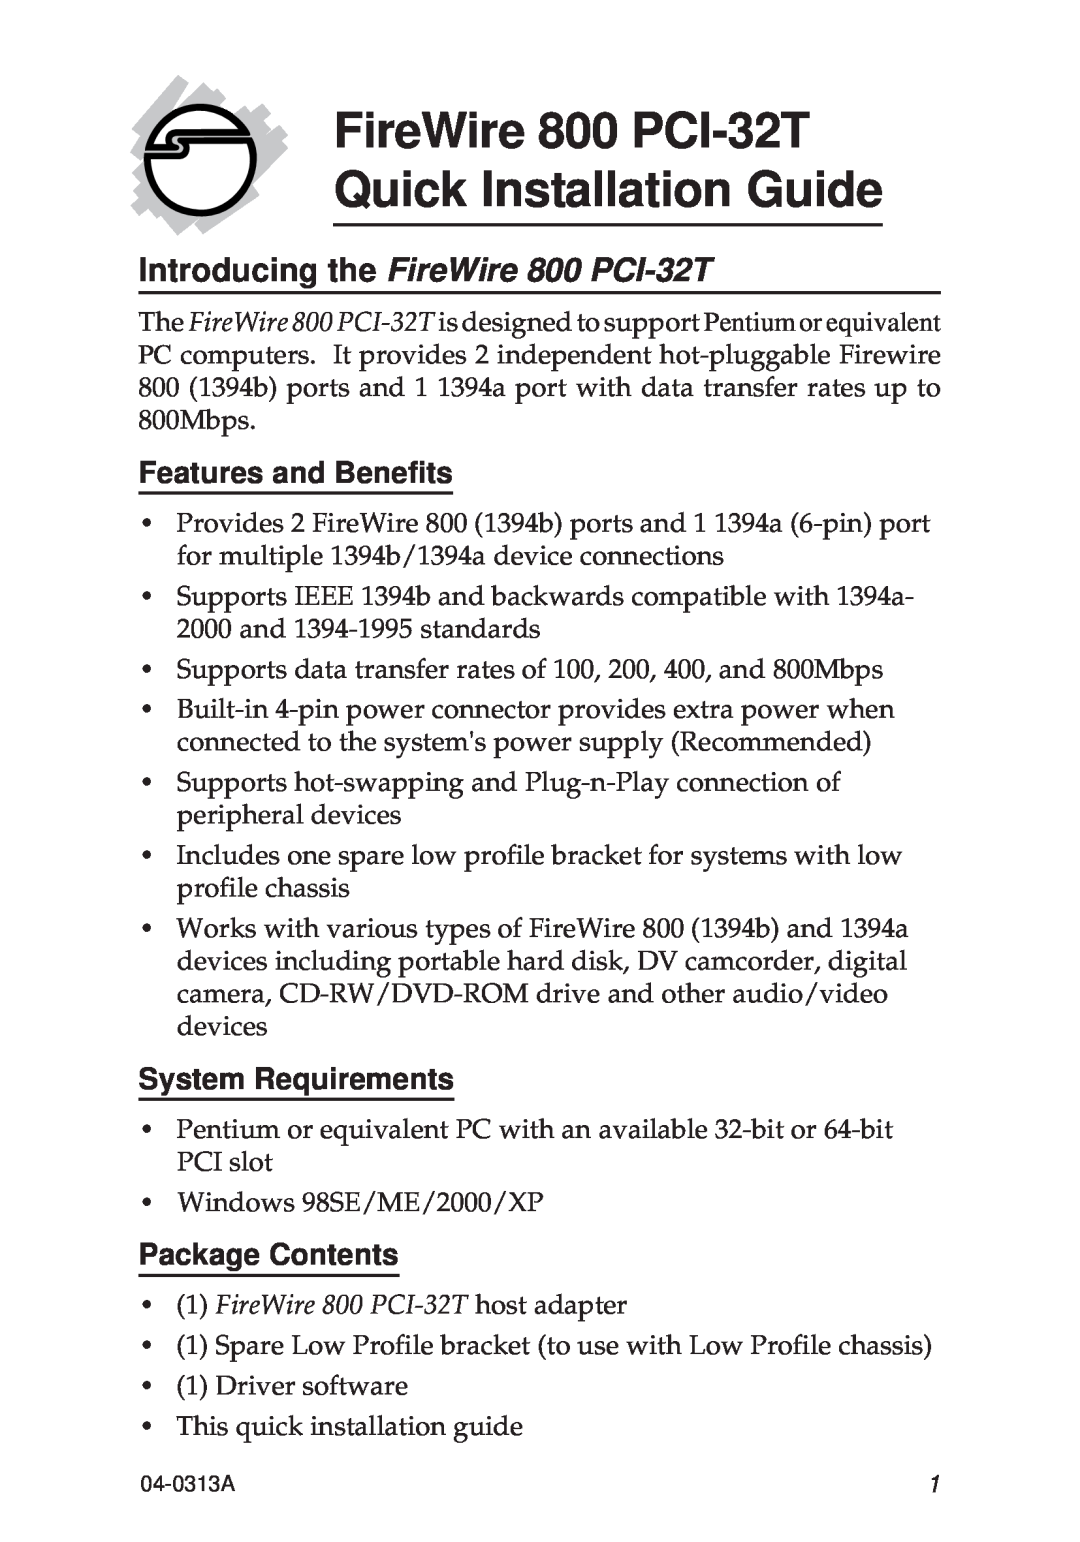 SIIG manual Features and Benefits, System Requirements, Package Contents, FireWire 800 PCI-32T host adapter 